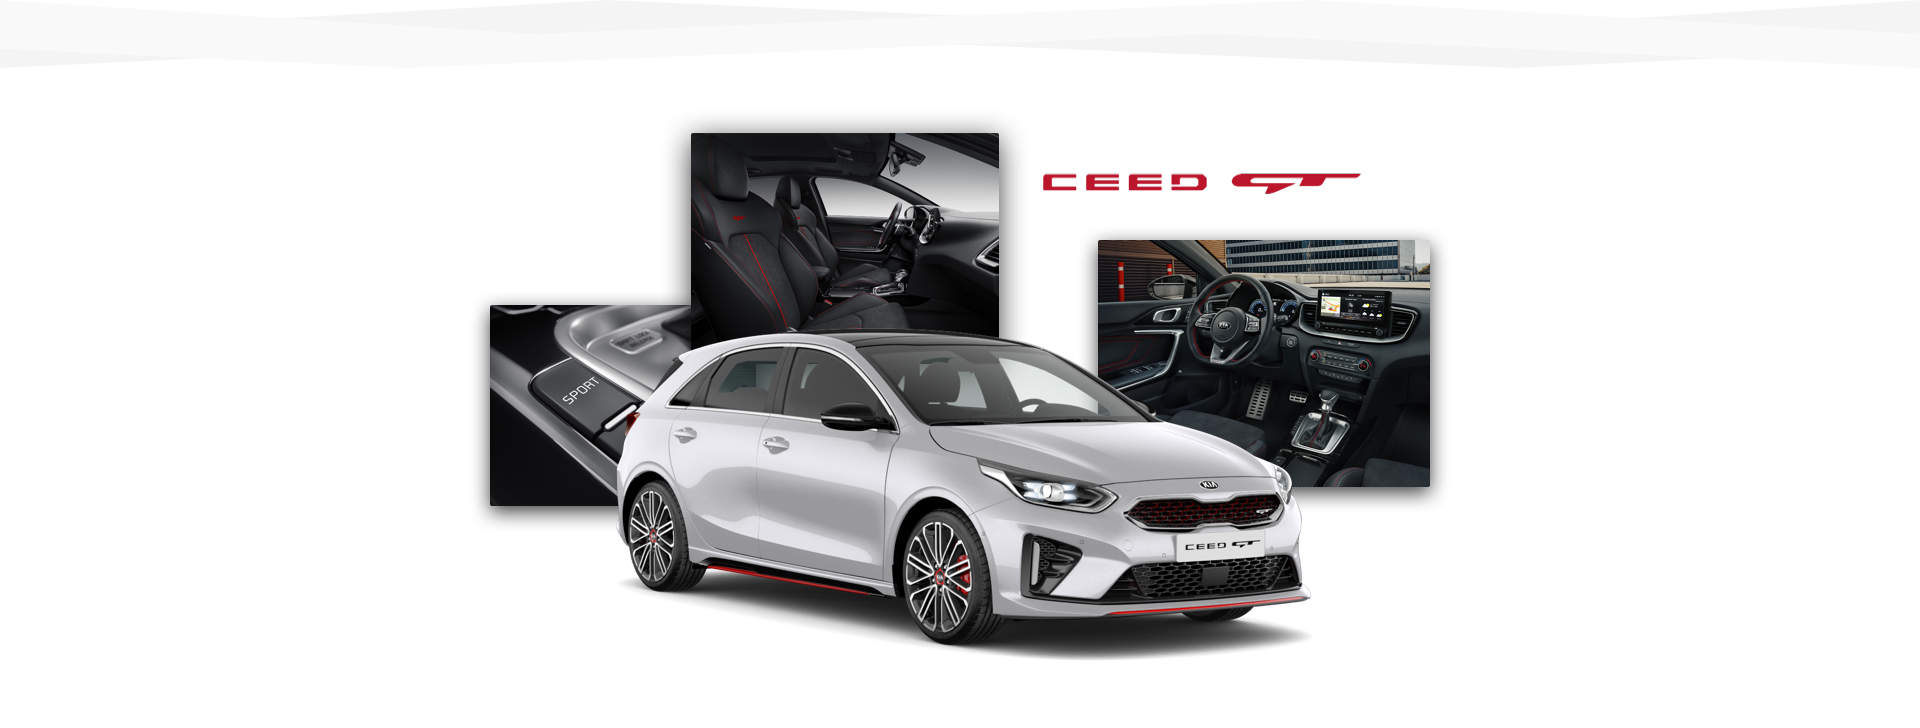 Side view of the Kia Ceed GT and shots of its interior and various controls